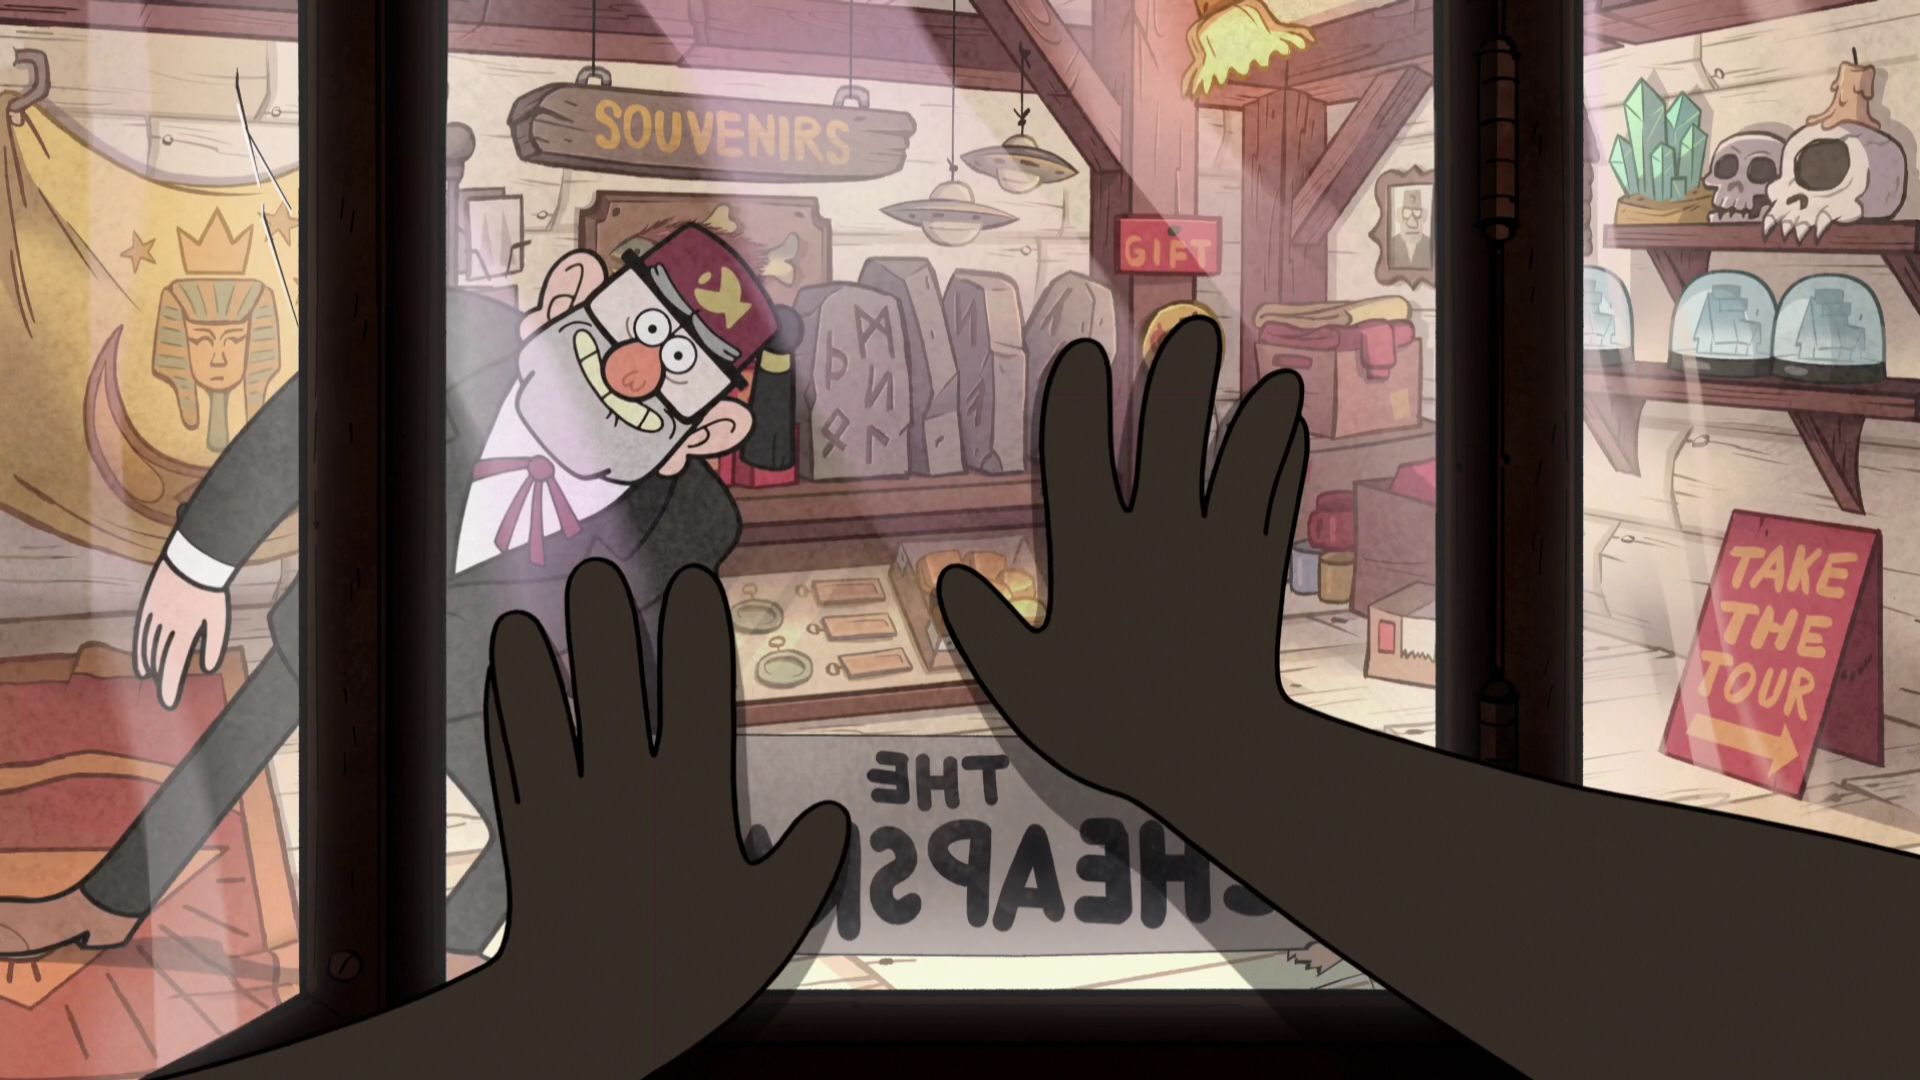 https://static.wikia.nocookie.net/gravityfalls/images/e/eb/S2e6_stan%27s_a_jerk.png/revision/latest?cb=20141007043300